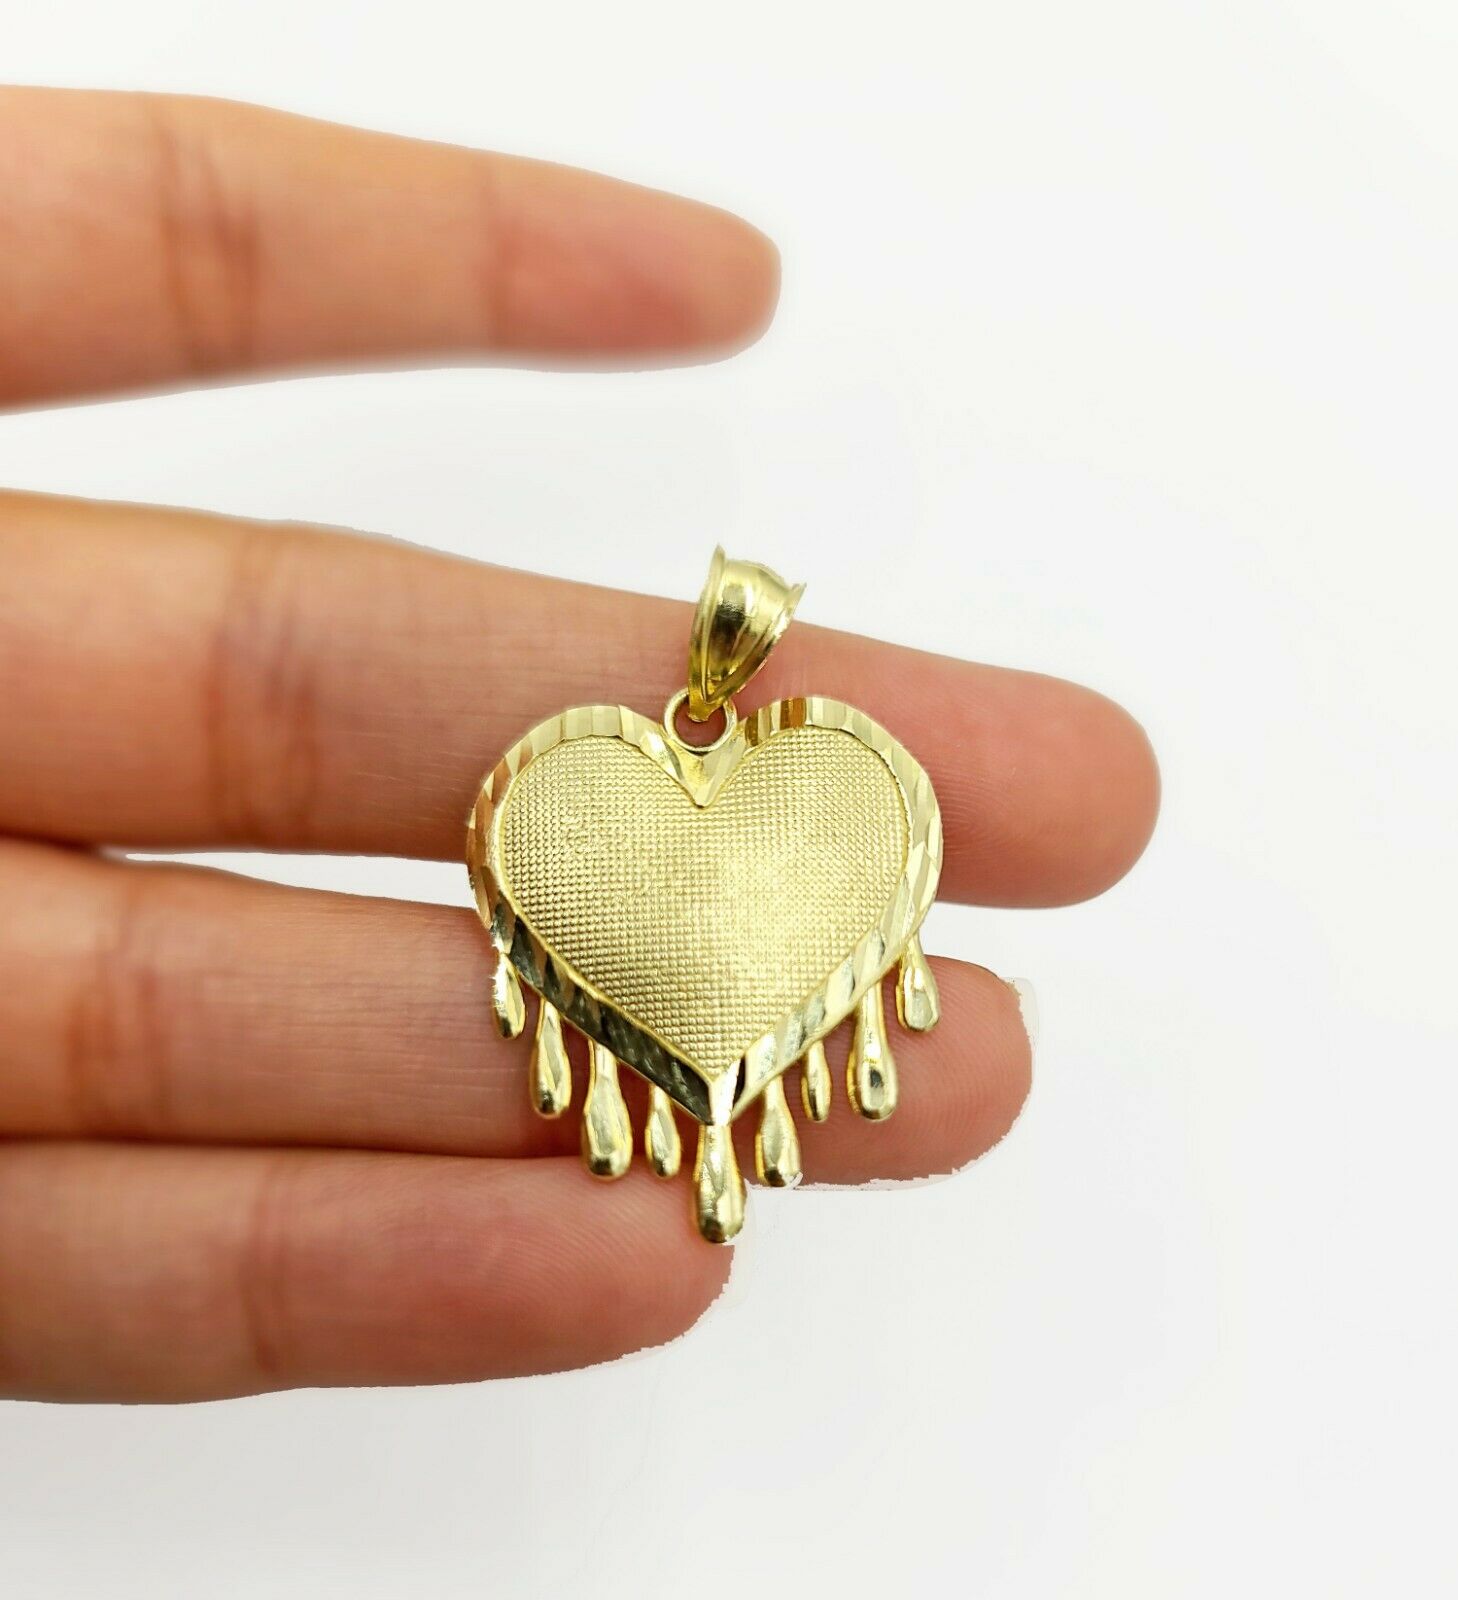 Real Gold Heart Pendant ladies Charm 10KT Yellow Gold Dripping Heart Love Oro